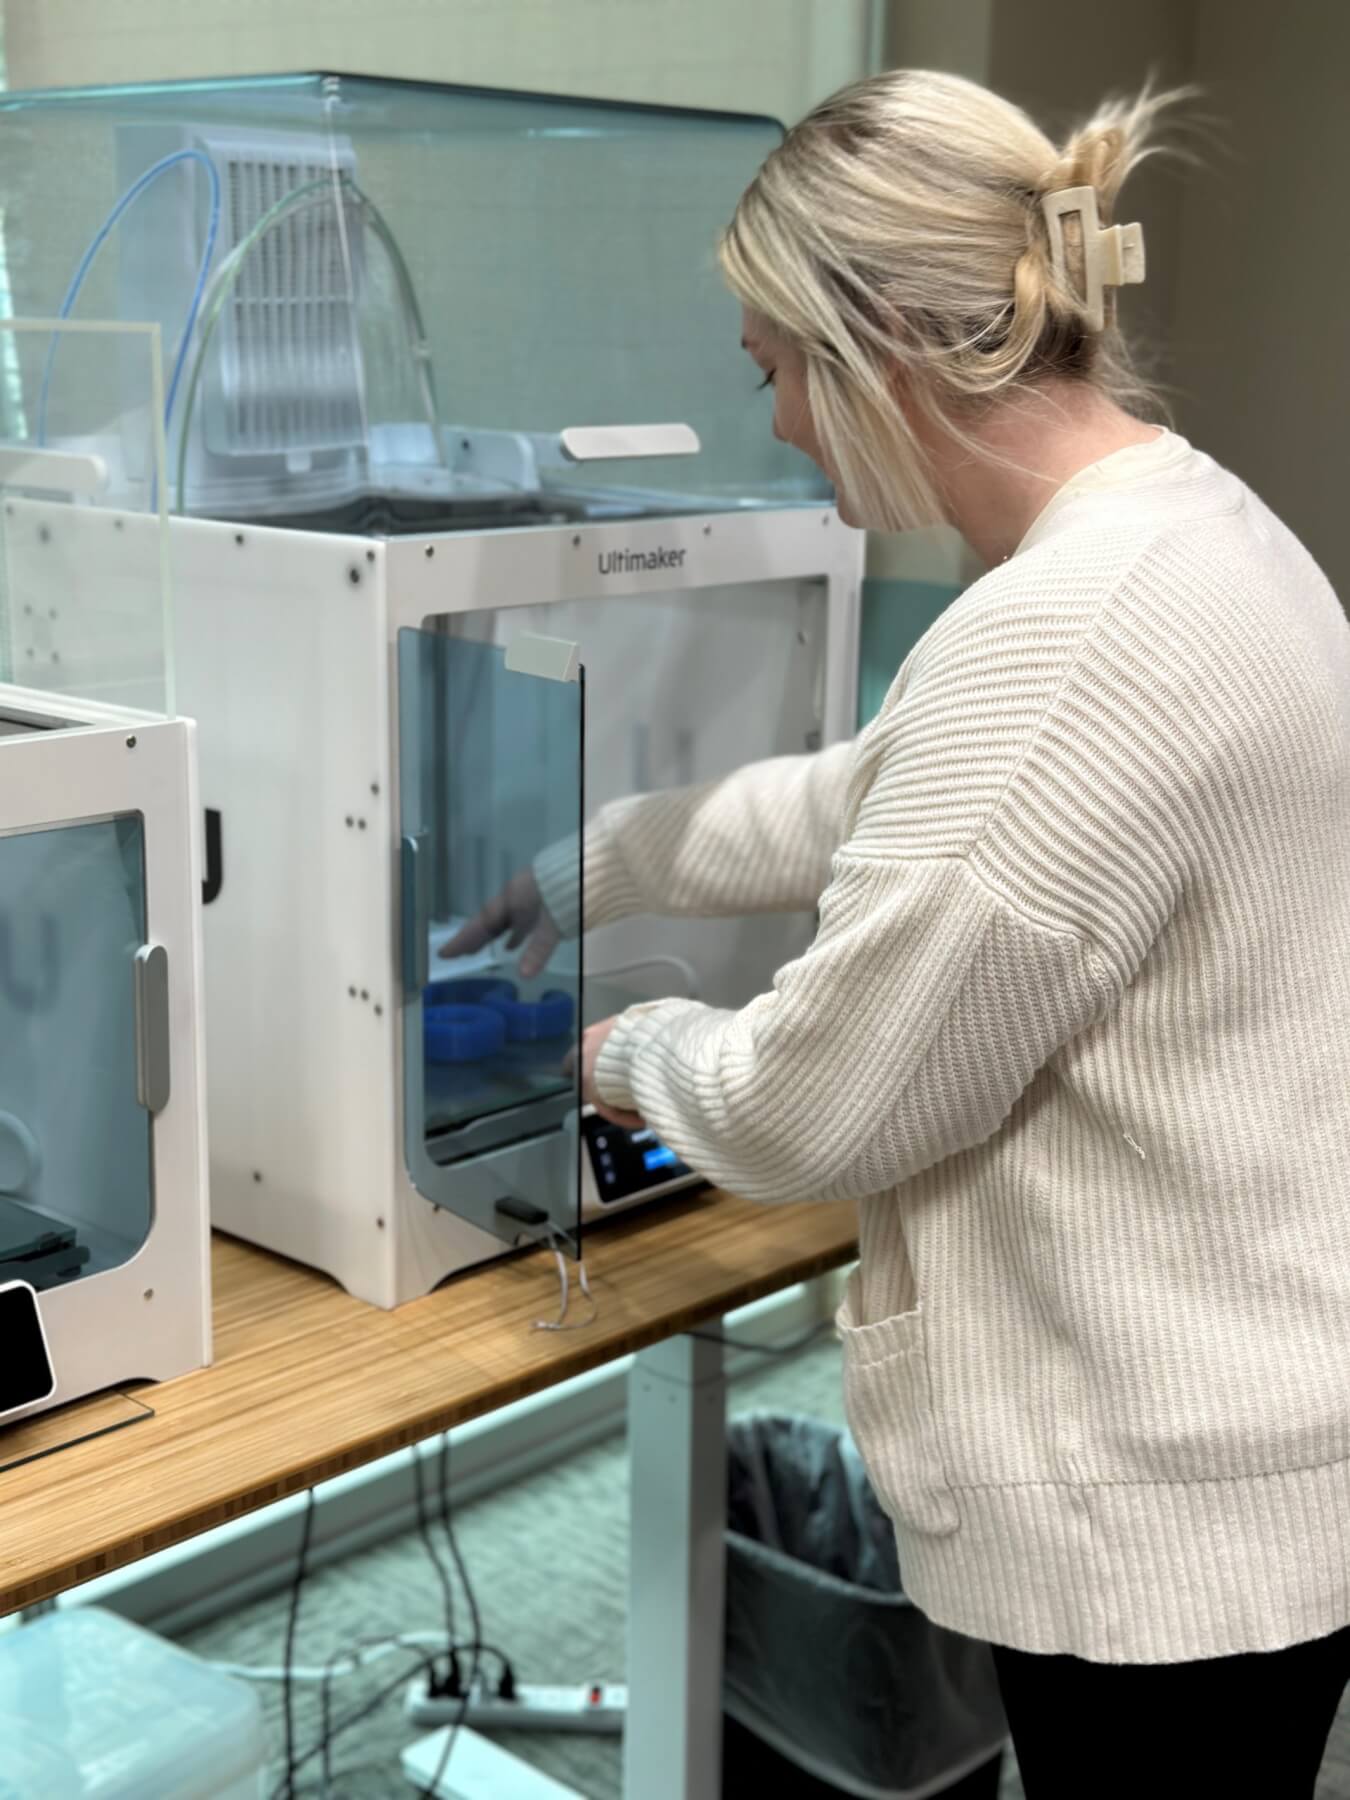 Courtney removing a finished print from 3D printer